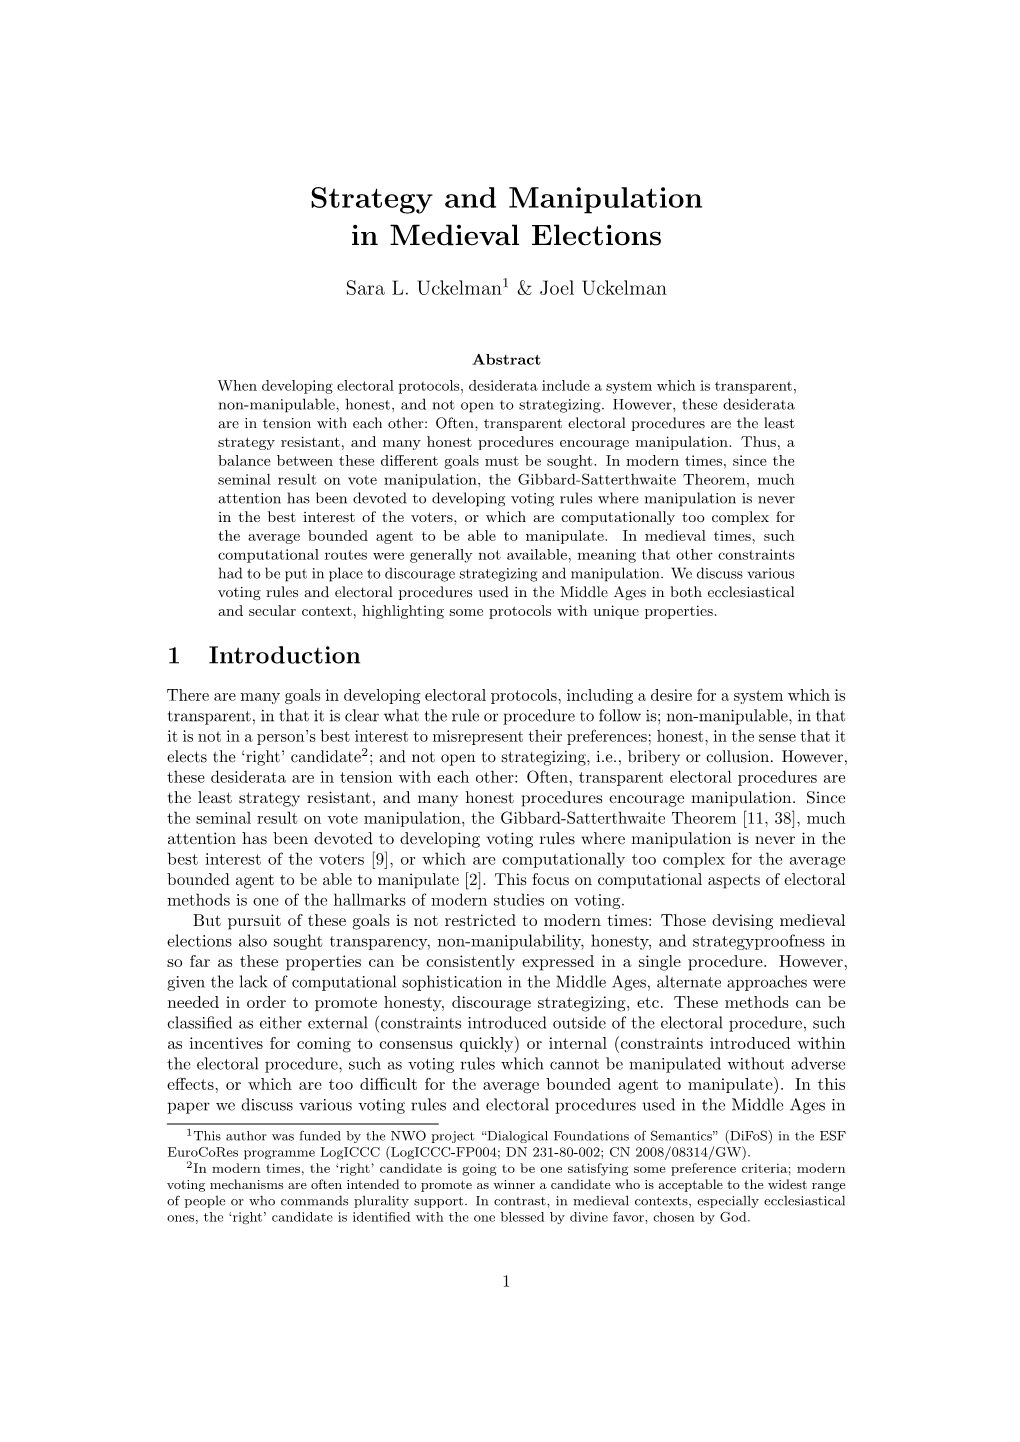 Strategy and Manipulation in Medieval Elections